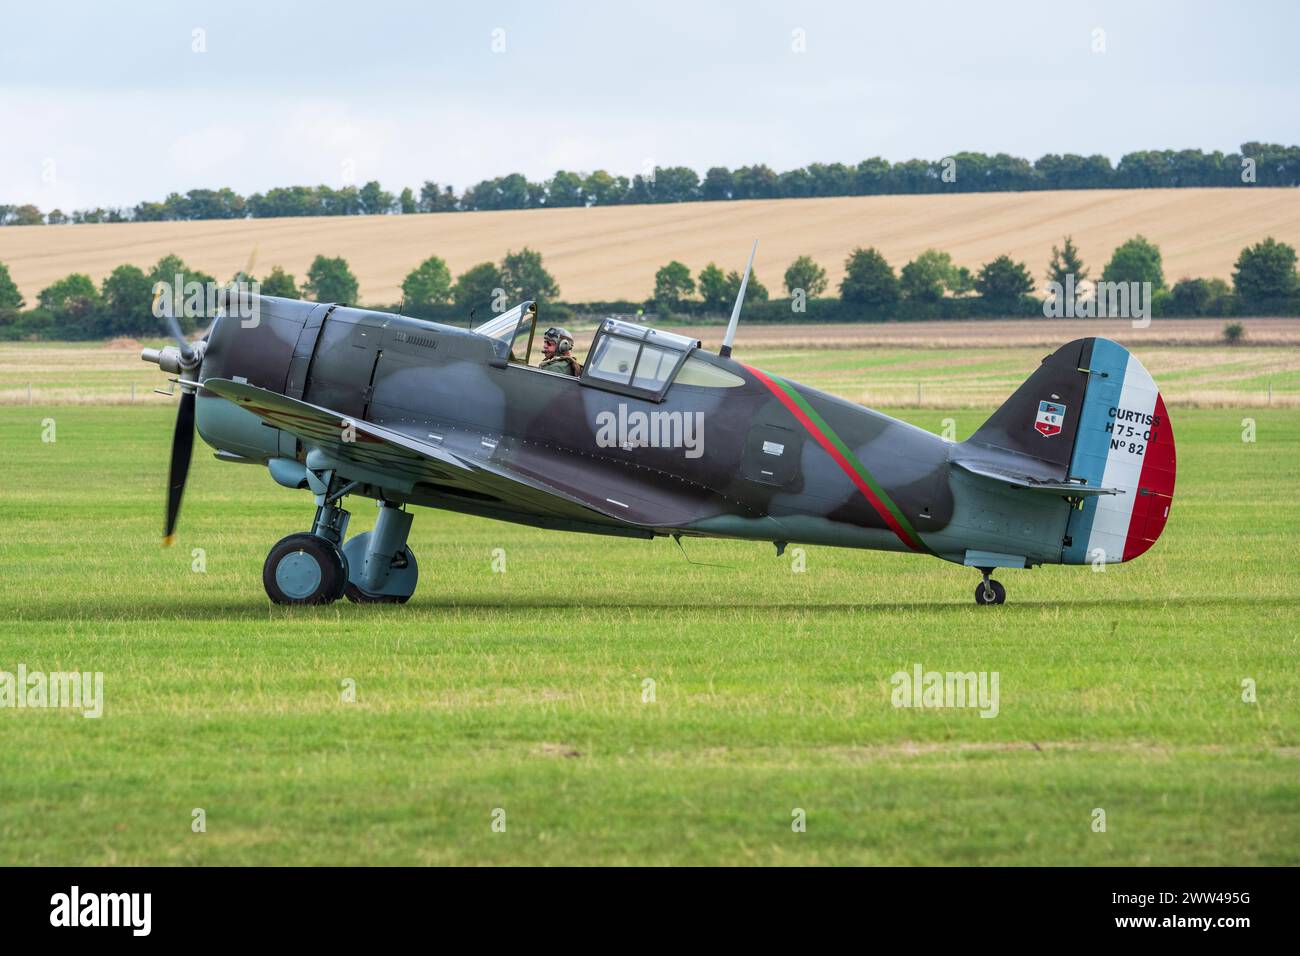 Curtiss Hawk 75 G-CCVH taxiing after finishing flying display at Duxford Battle of Britain Air Show 2022, Duxford Airfield, Cambridgeshire, England UK Stock Photo